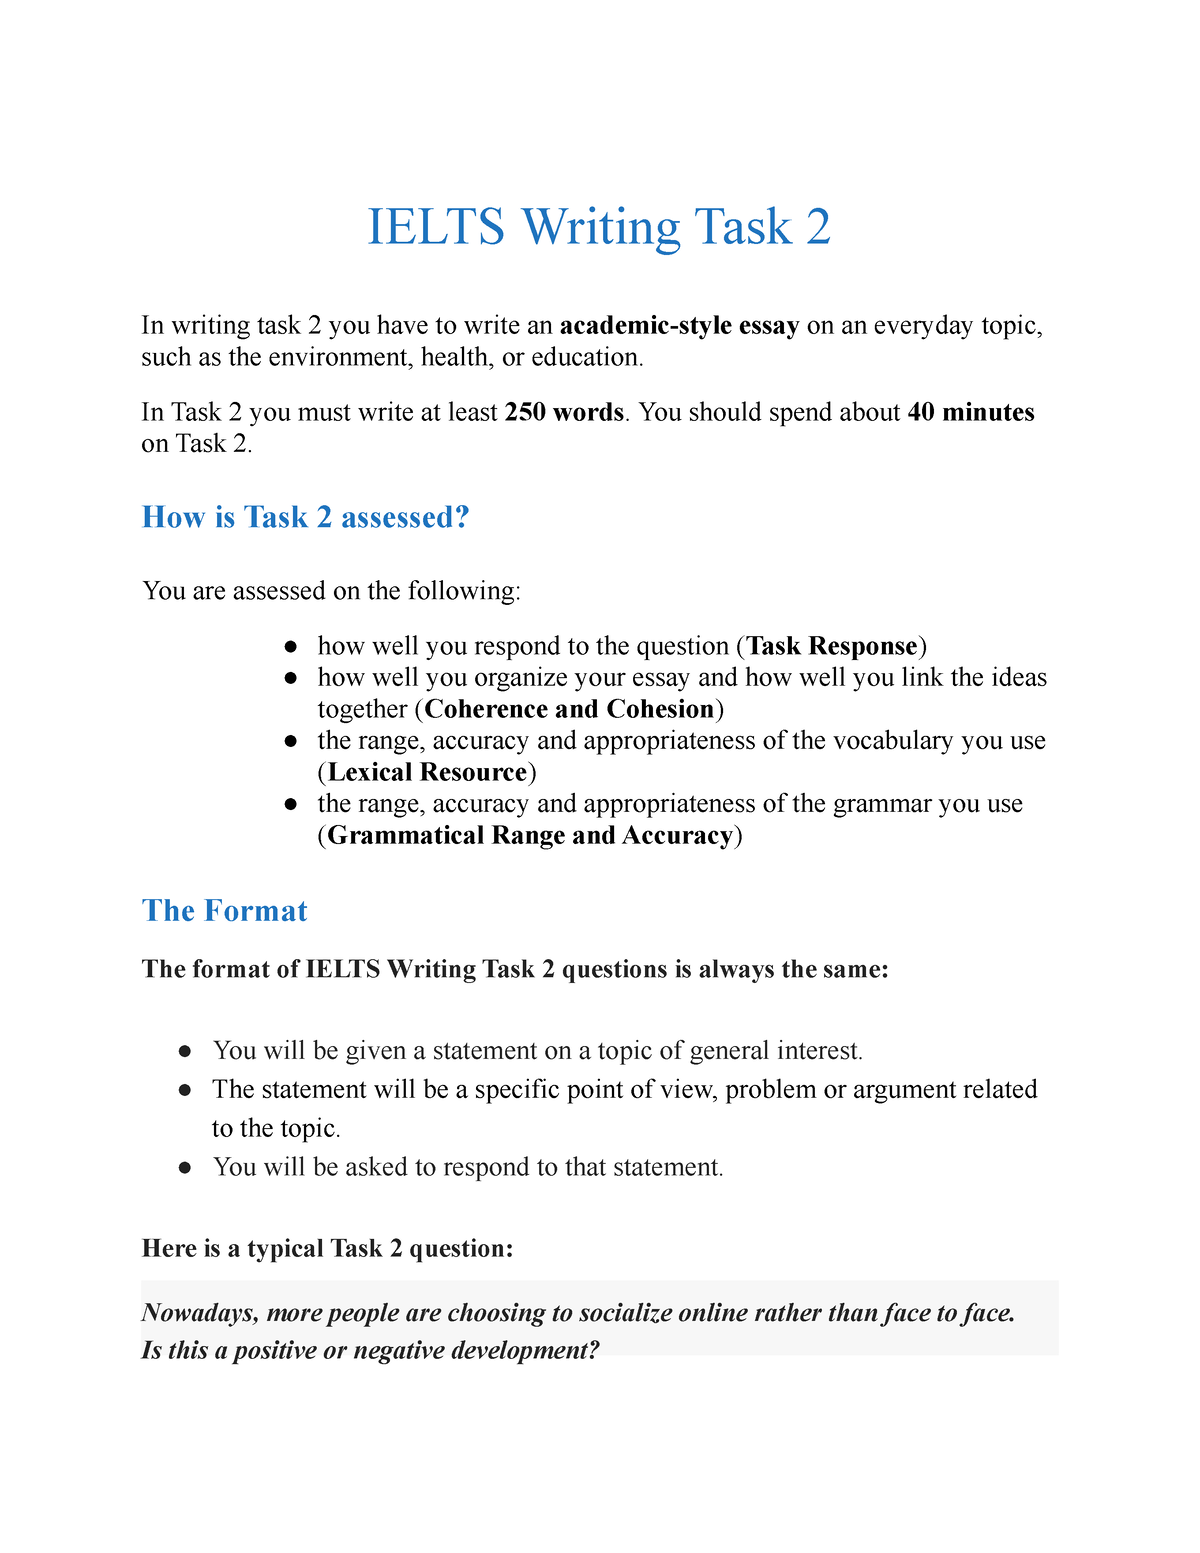 UNIT 3 - Writing - Handout - IELTS Writing Task 2 In writing task 2 you ...